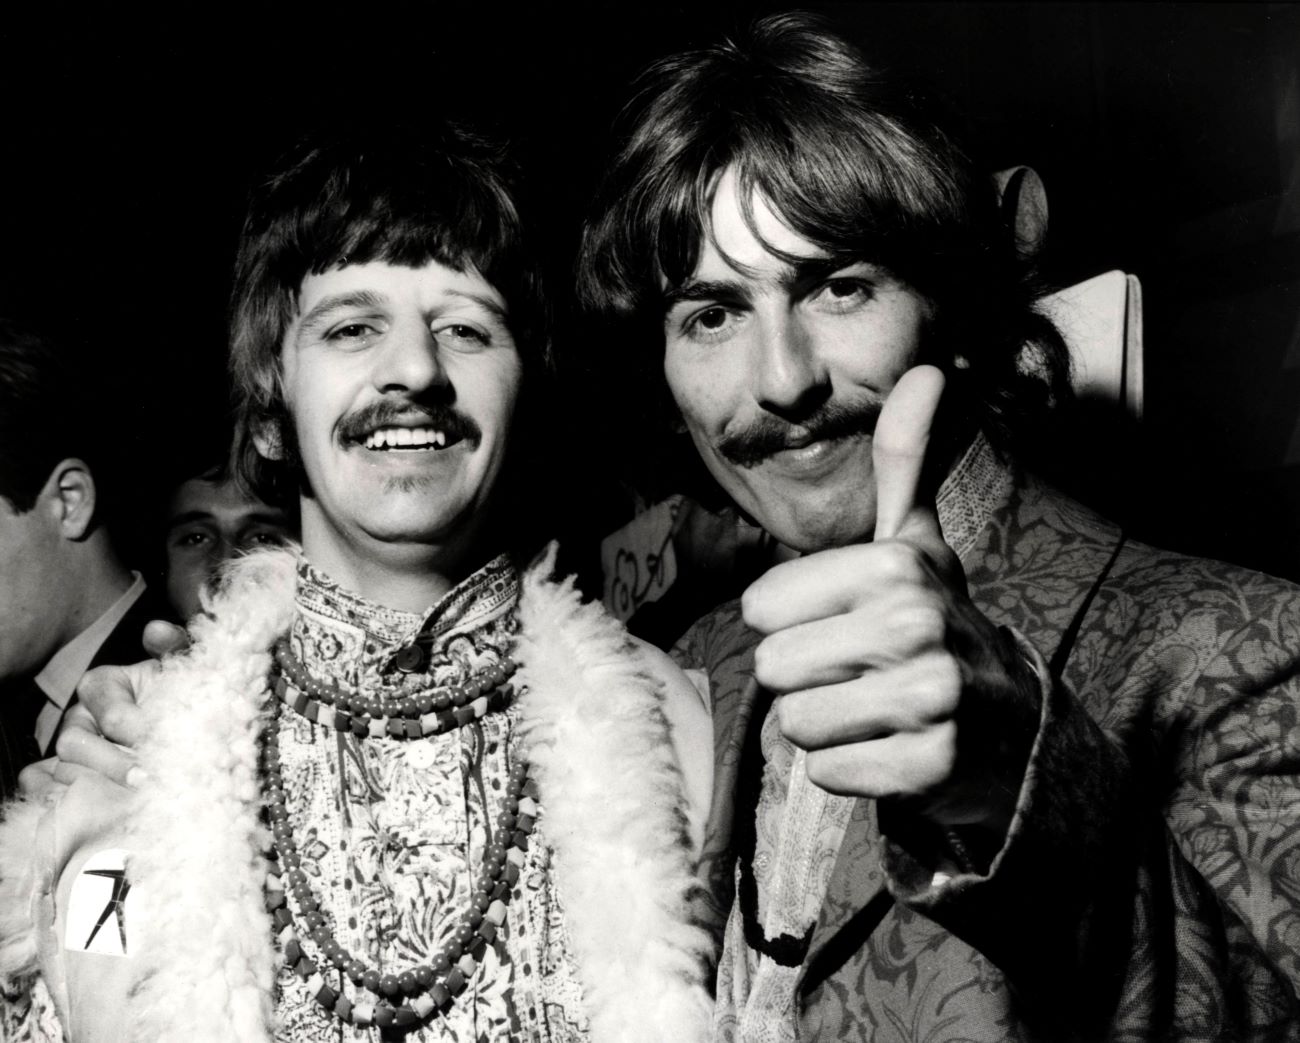 A black and white picture of George Harrison holding up a thumbs up with his arm around Ringo Starr's shoulders.